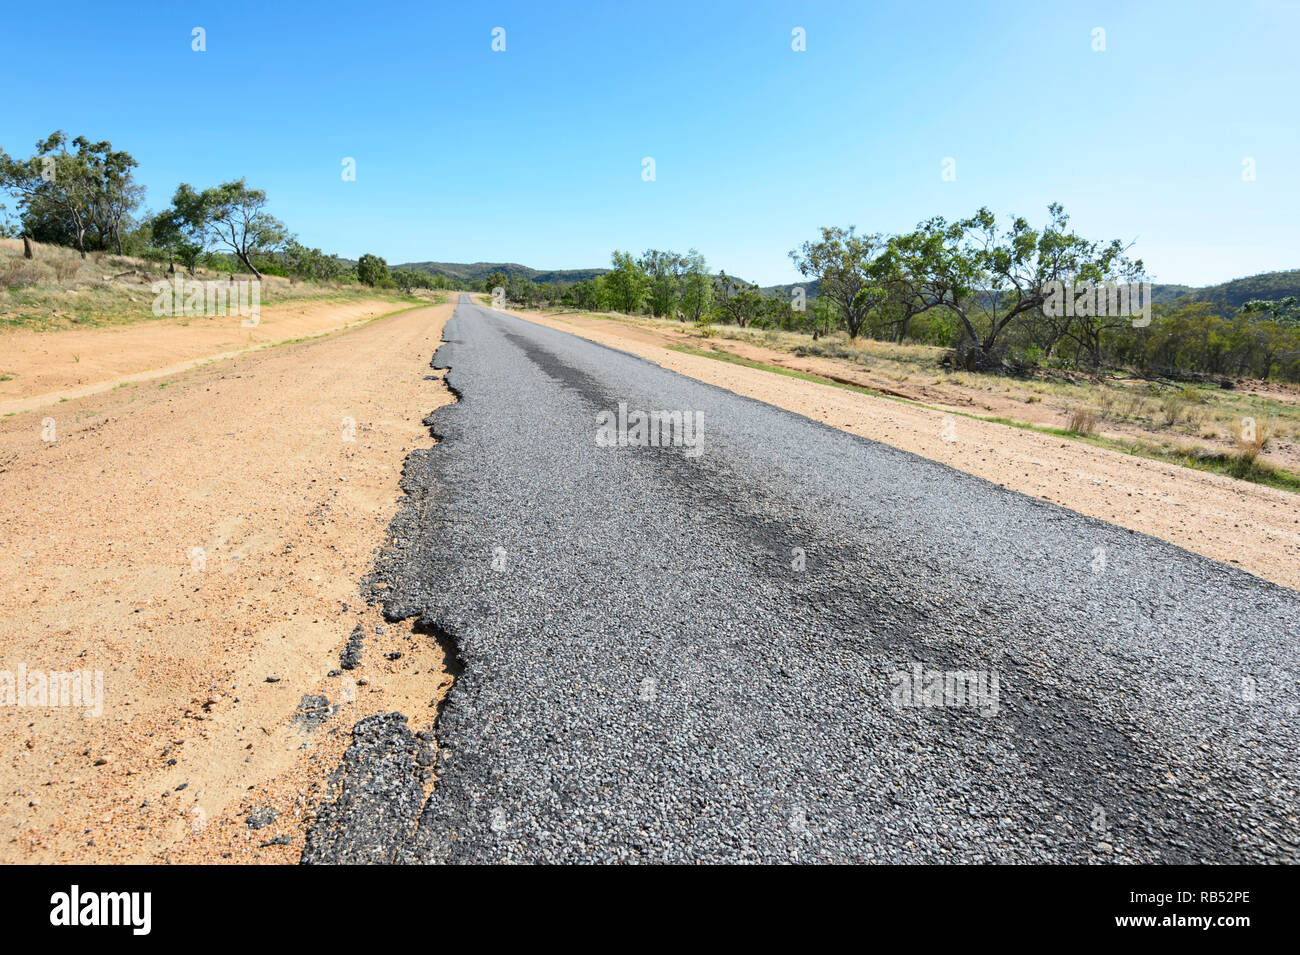 Part of the Savannah Way is a narrow ribbon road with damaged edges, Queensland, QLD, Australia Stock Photo